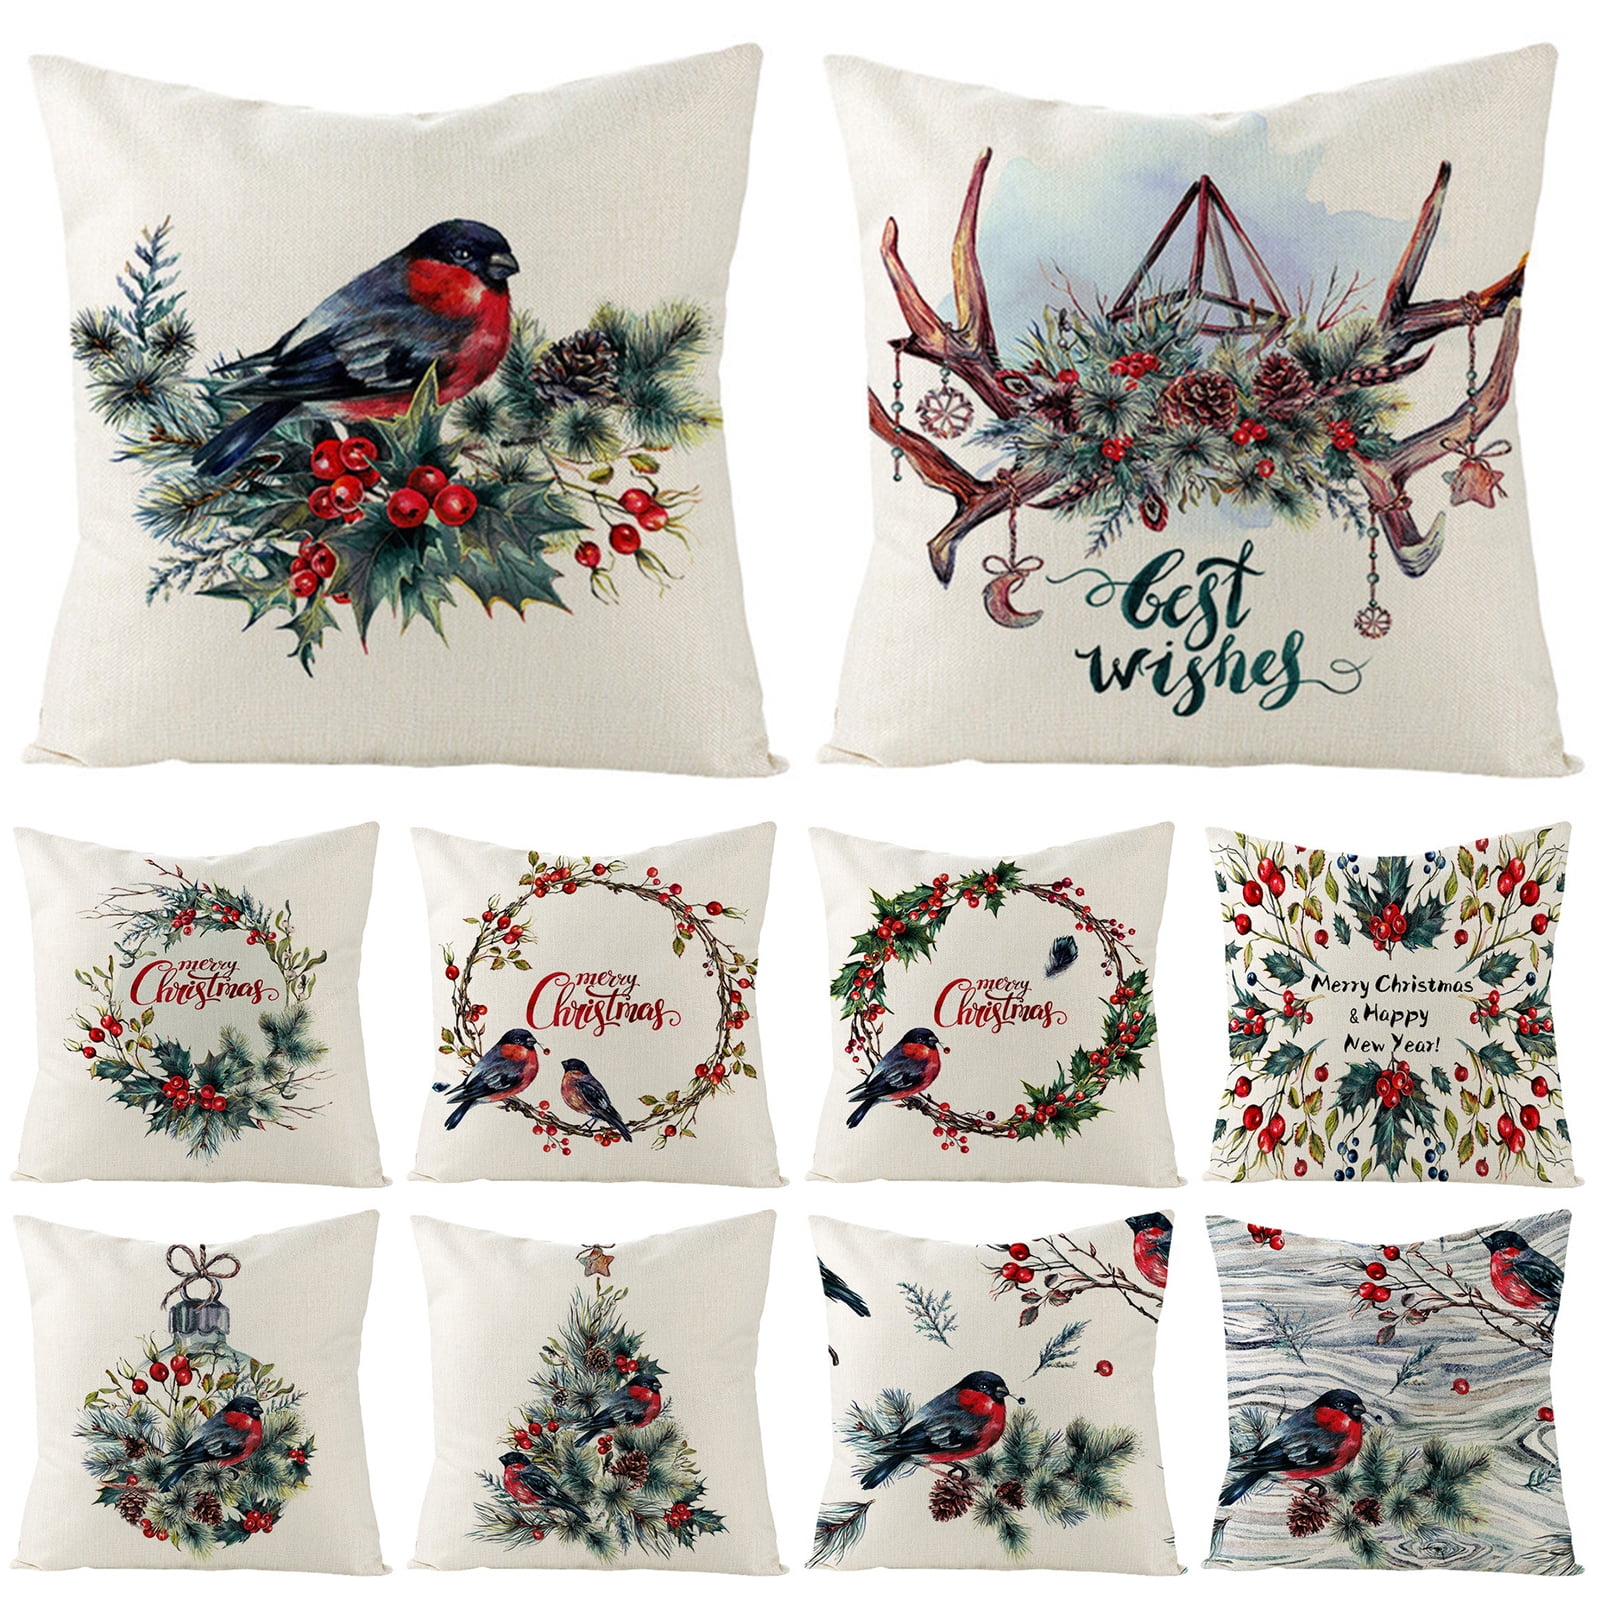 Details about   2Pcs Birds Tree Print Pillow Case Cover Polyester Pillowcases Bedding Home Decor 